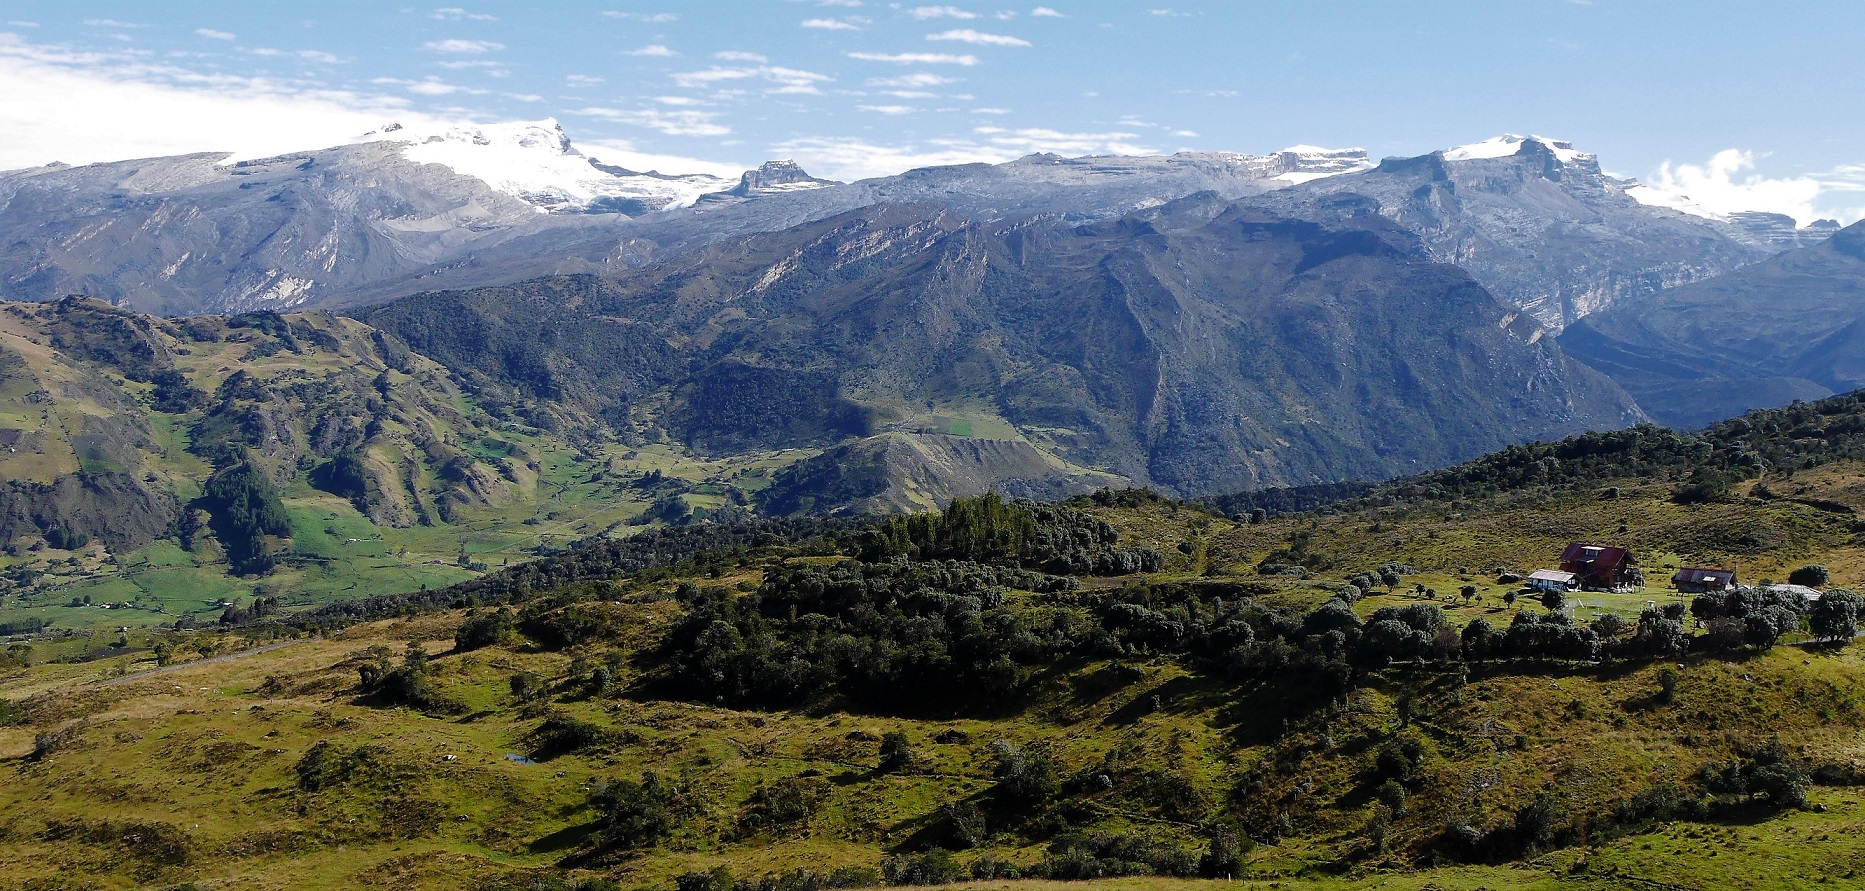 The El Cocuy massif from Guiacany Finca, where you can also rent cabins, close to the Lagunillas-Pulpito trail.